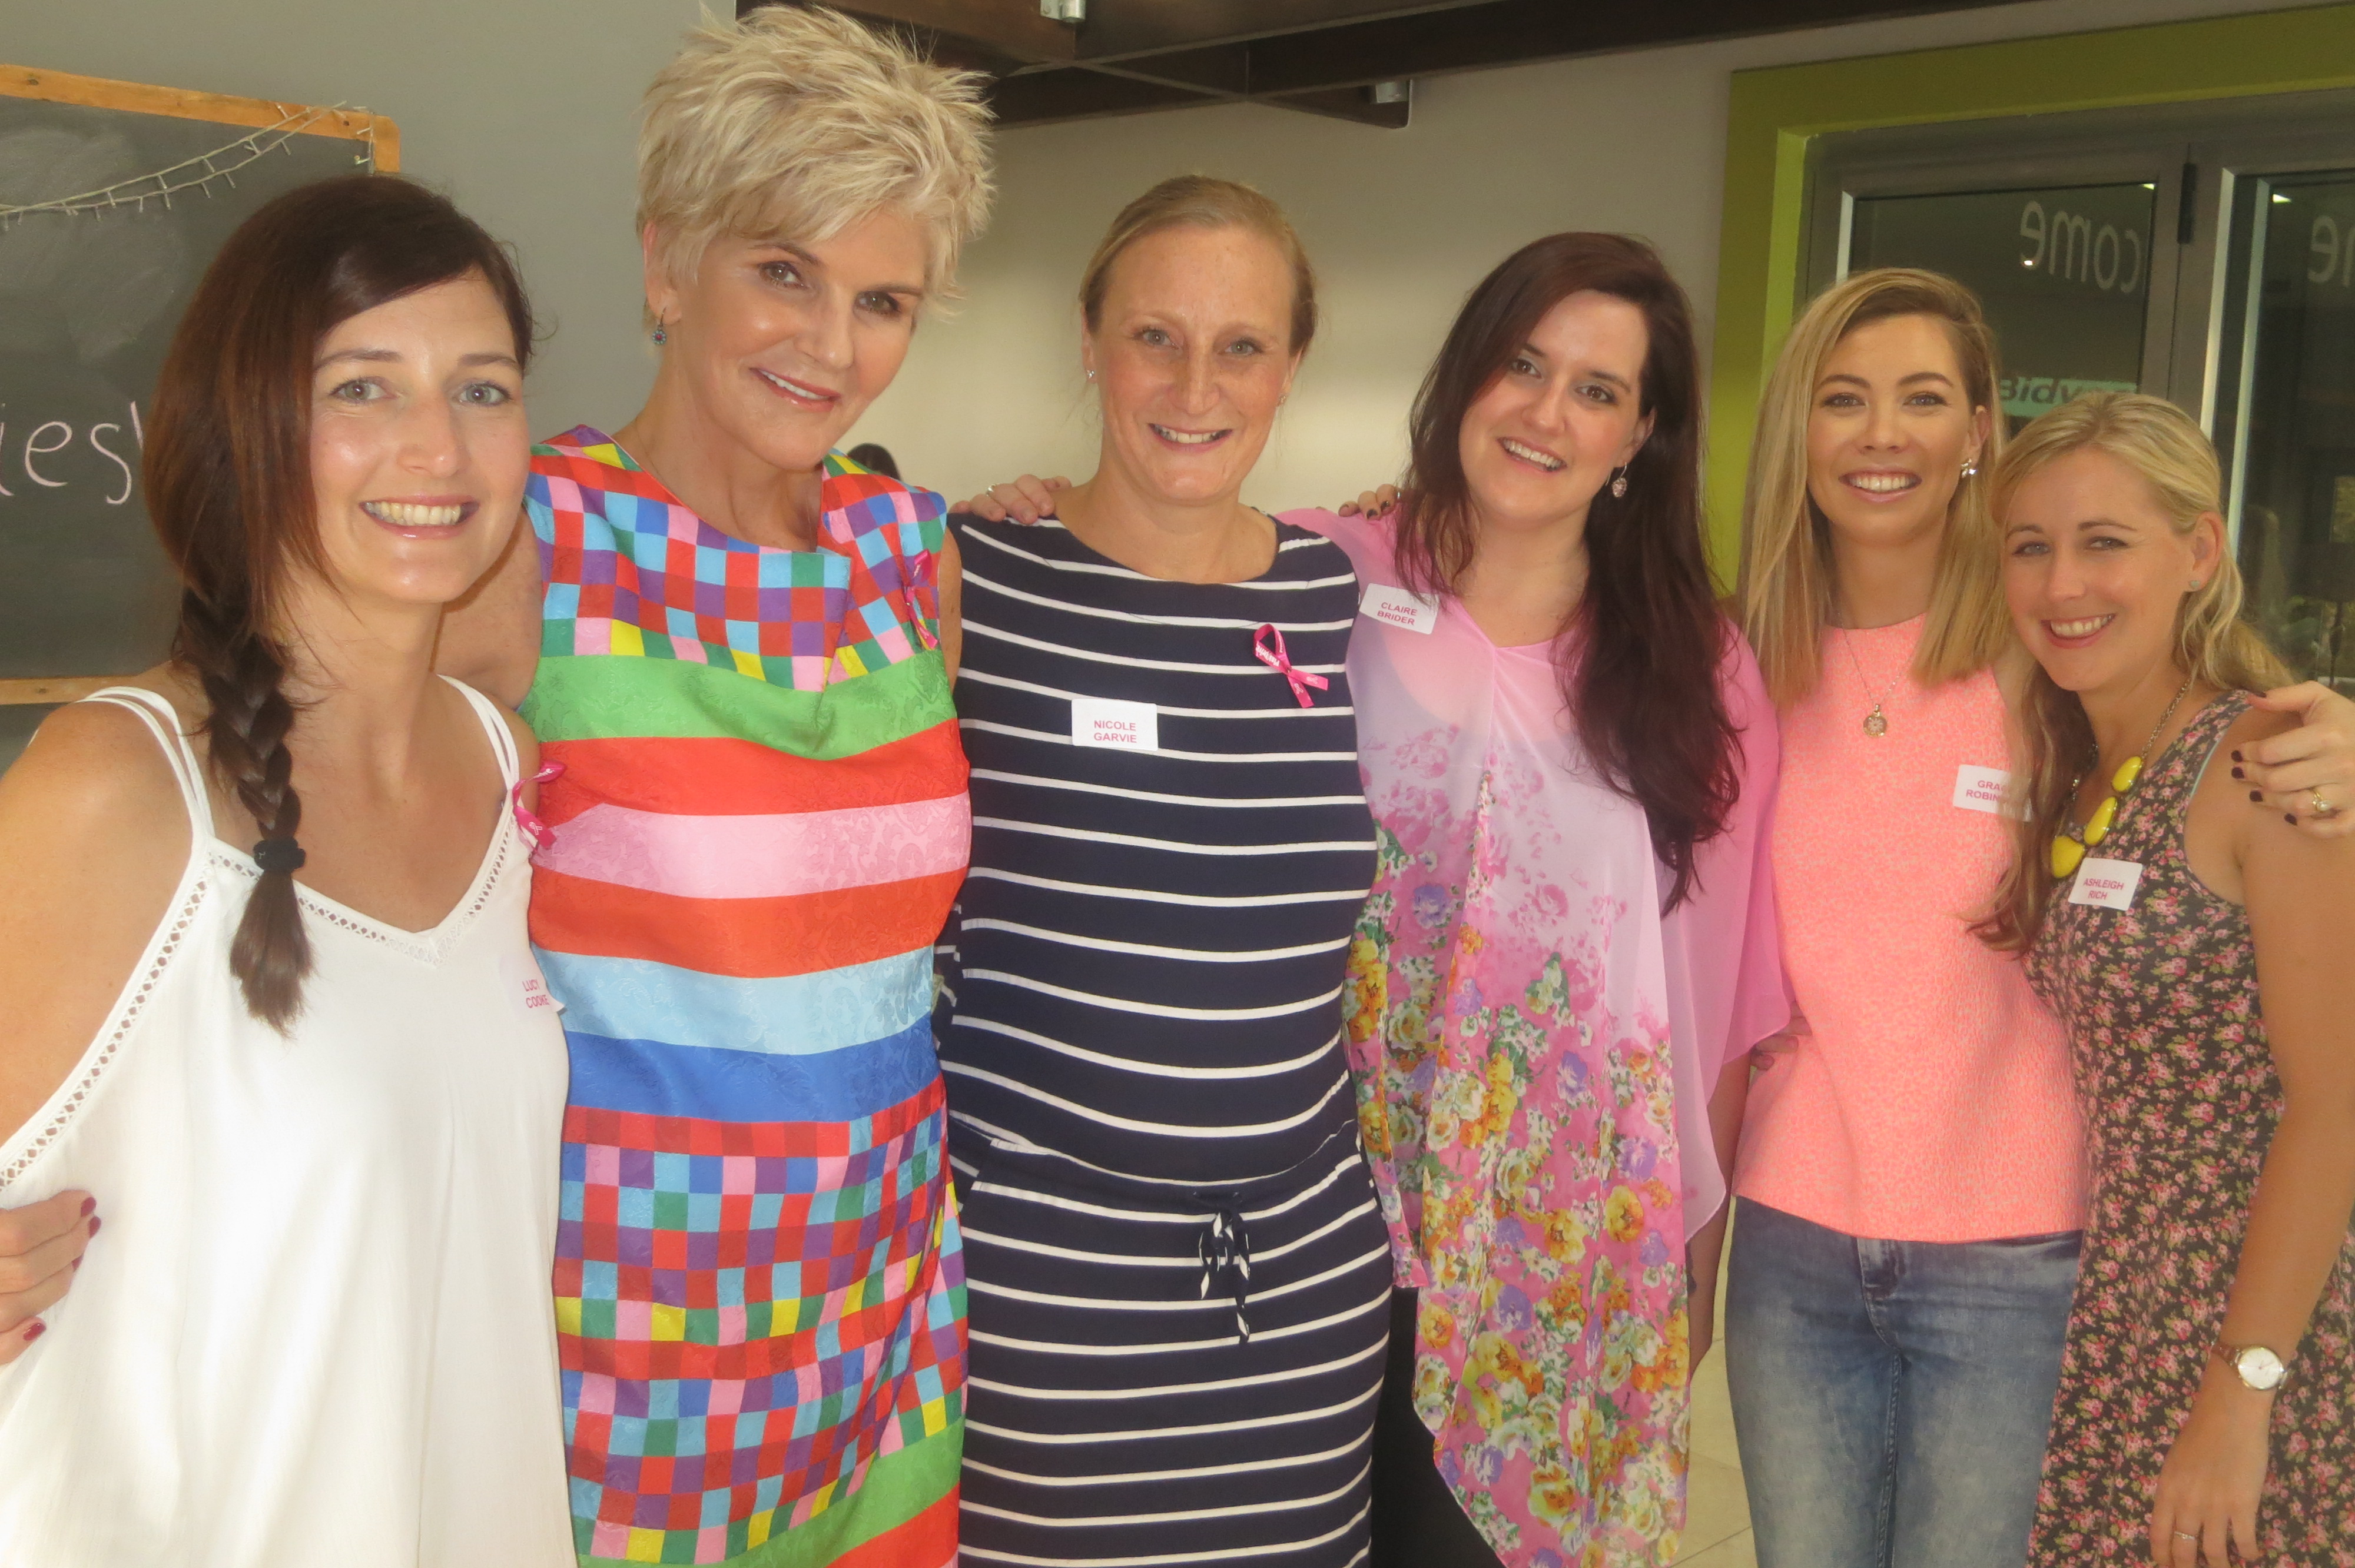 Lucy Cooke, PJ Powers, Nicole Garvie, Claire Brider, Grace Winter and Ashleigh Rich